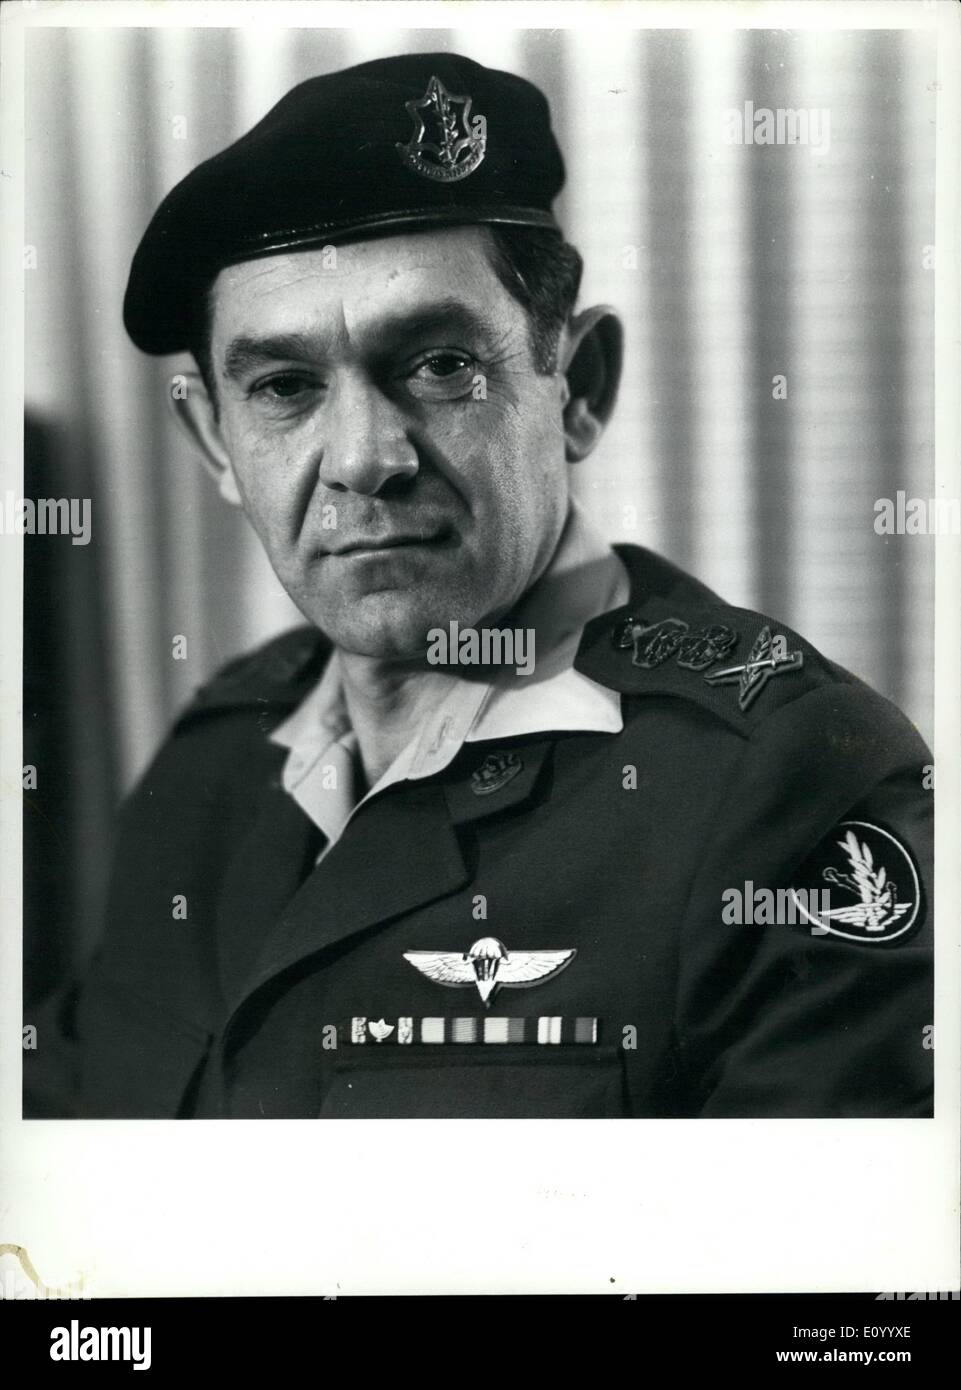 Dec. 12, 1971 - Israel's New chief of staff. photo shows Major Gen. David Elazar, who on January 1st. 1972 becomes Israel's new Stock Photo